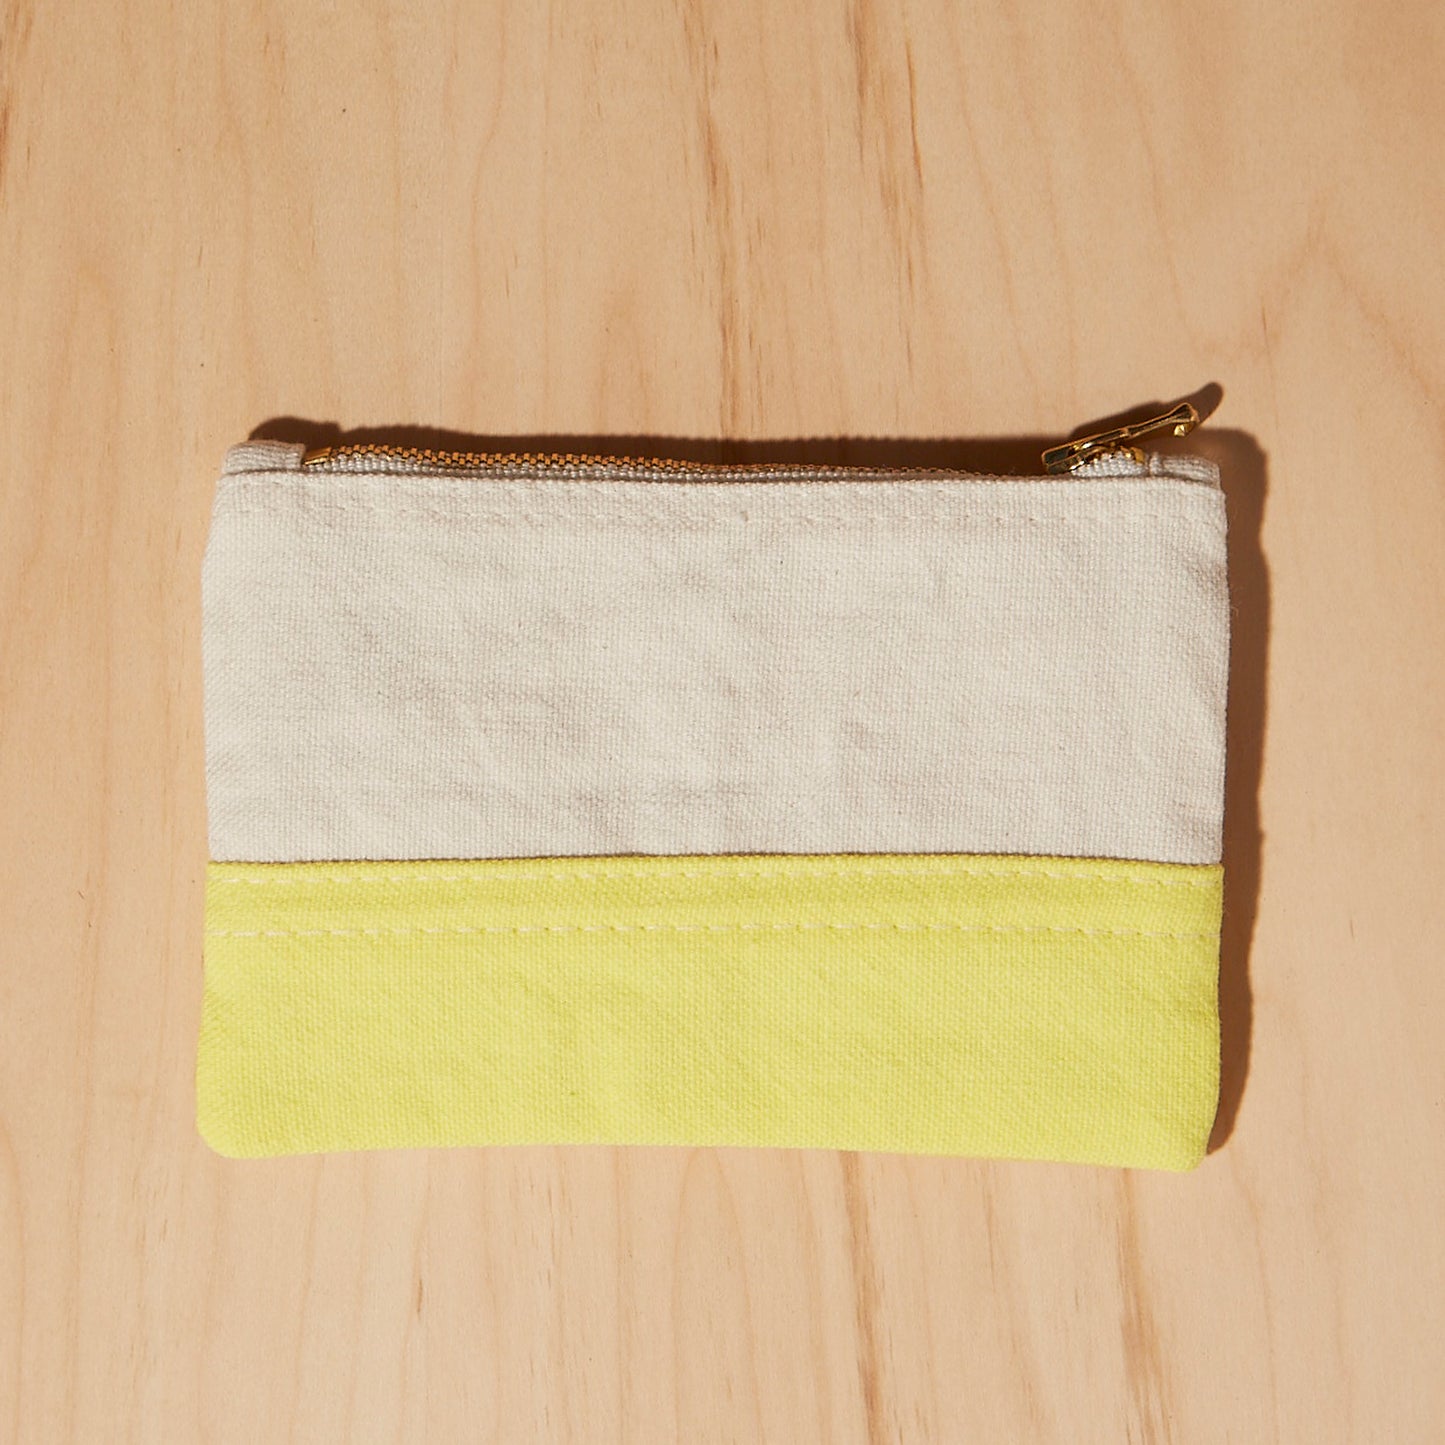 Re:Canvas "Threes" Pouch in Morning Hike